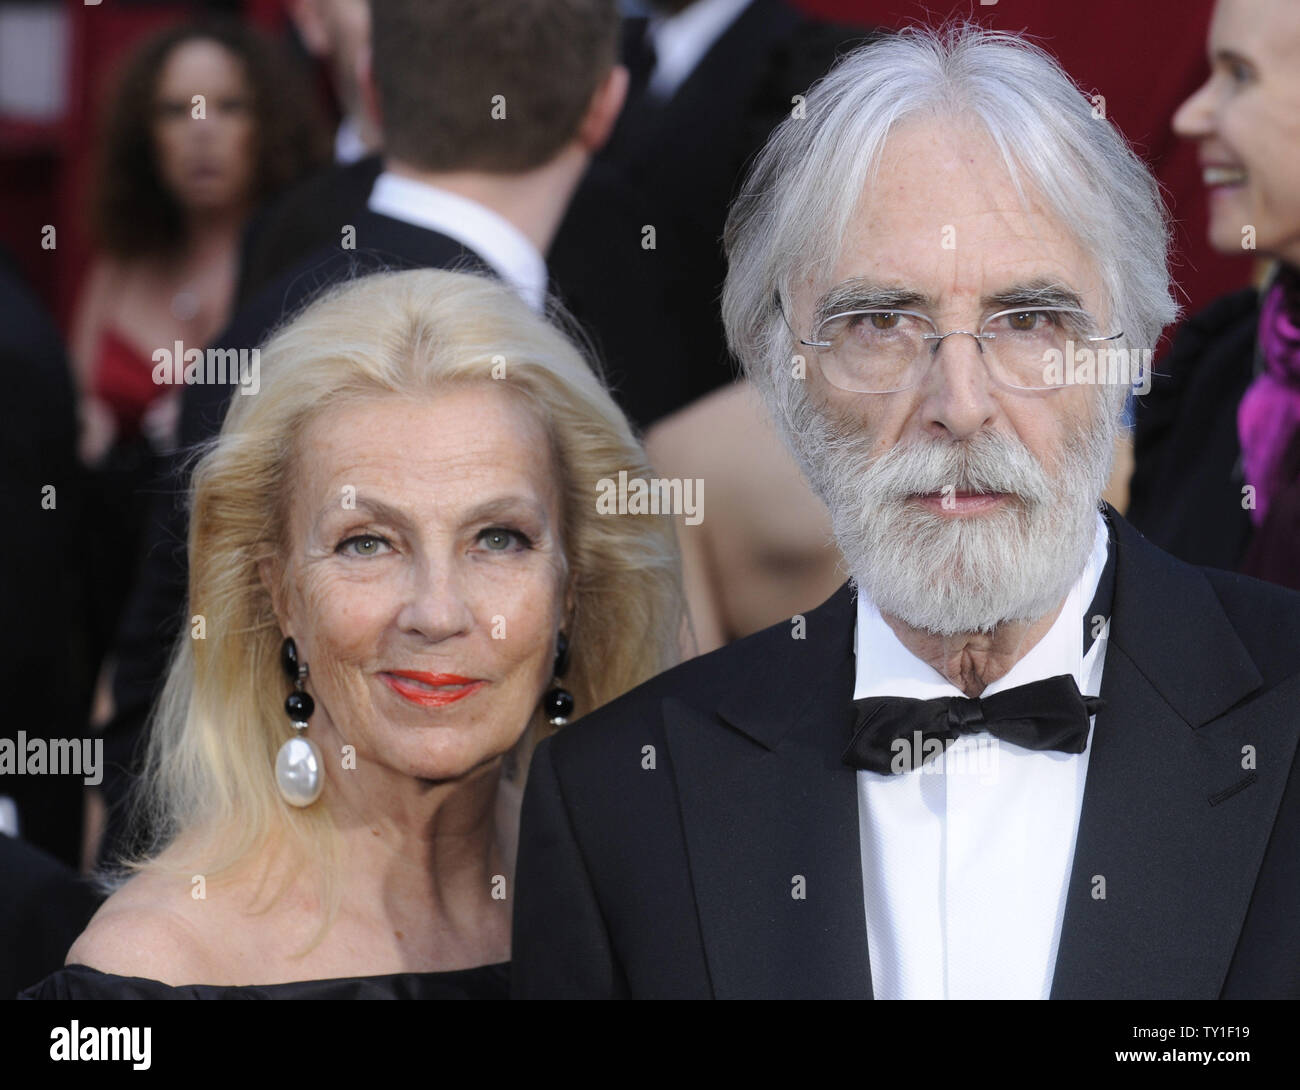 Director Michael Haneke and his wife Susanne arrive on the red carpet at the 82nd Academy Awards in Hollywood on March 7, 2010.   UPI/Phil McCarten Stock Photo